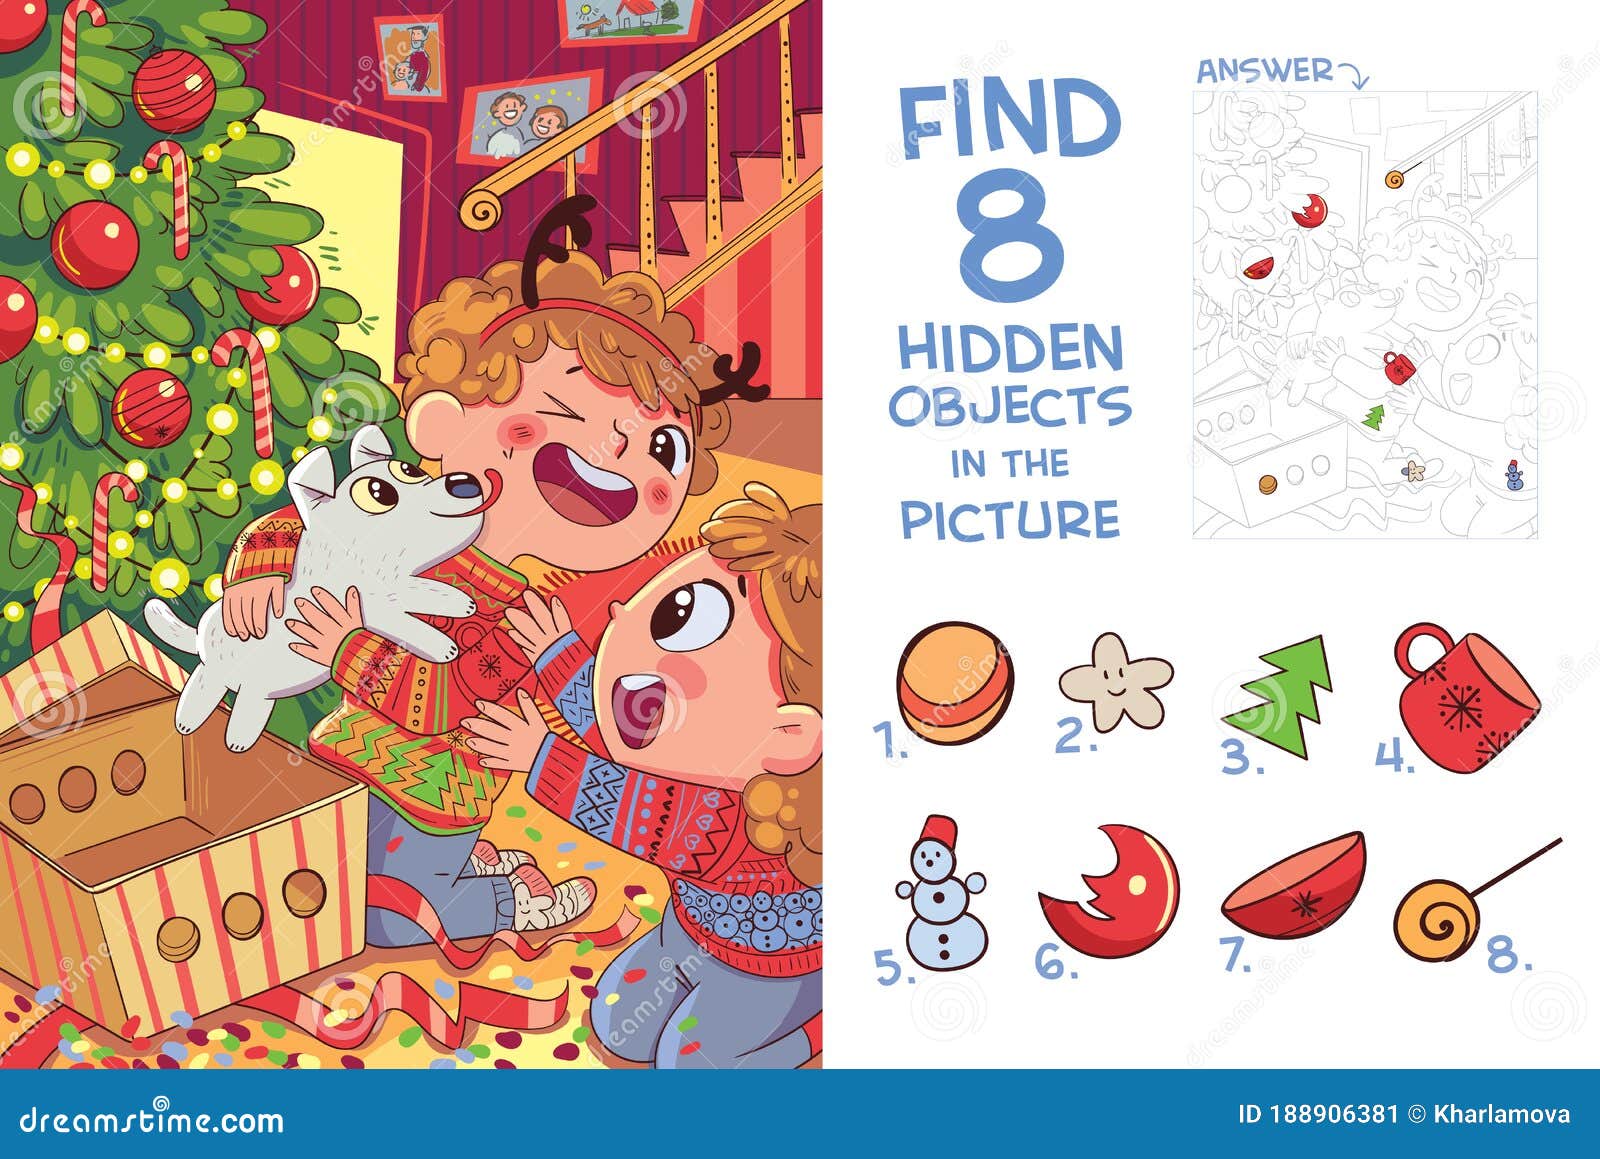 children presented puppy for christmas. find 8 hidden objects in the picture